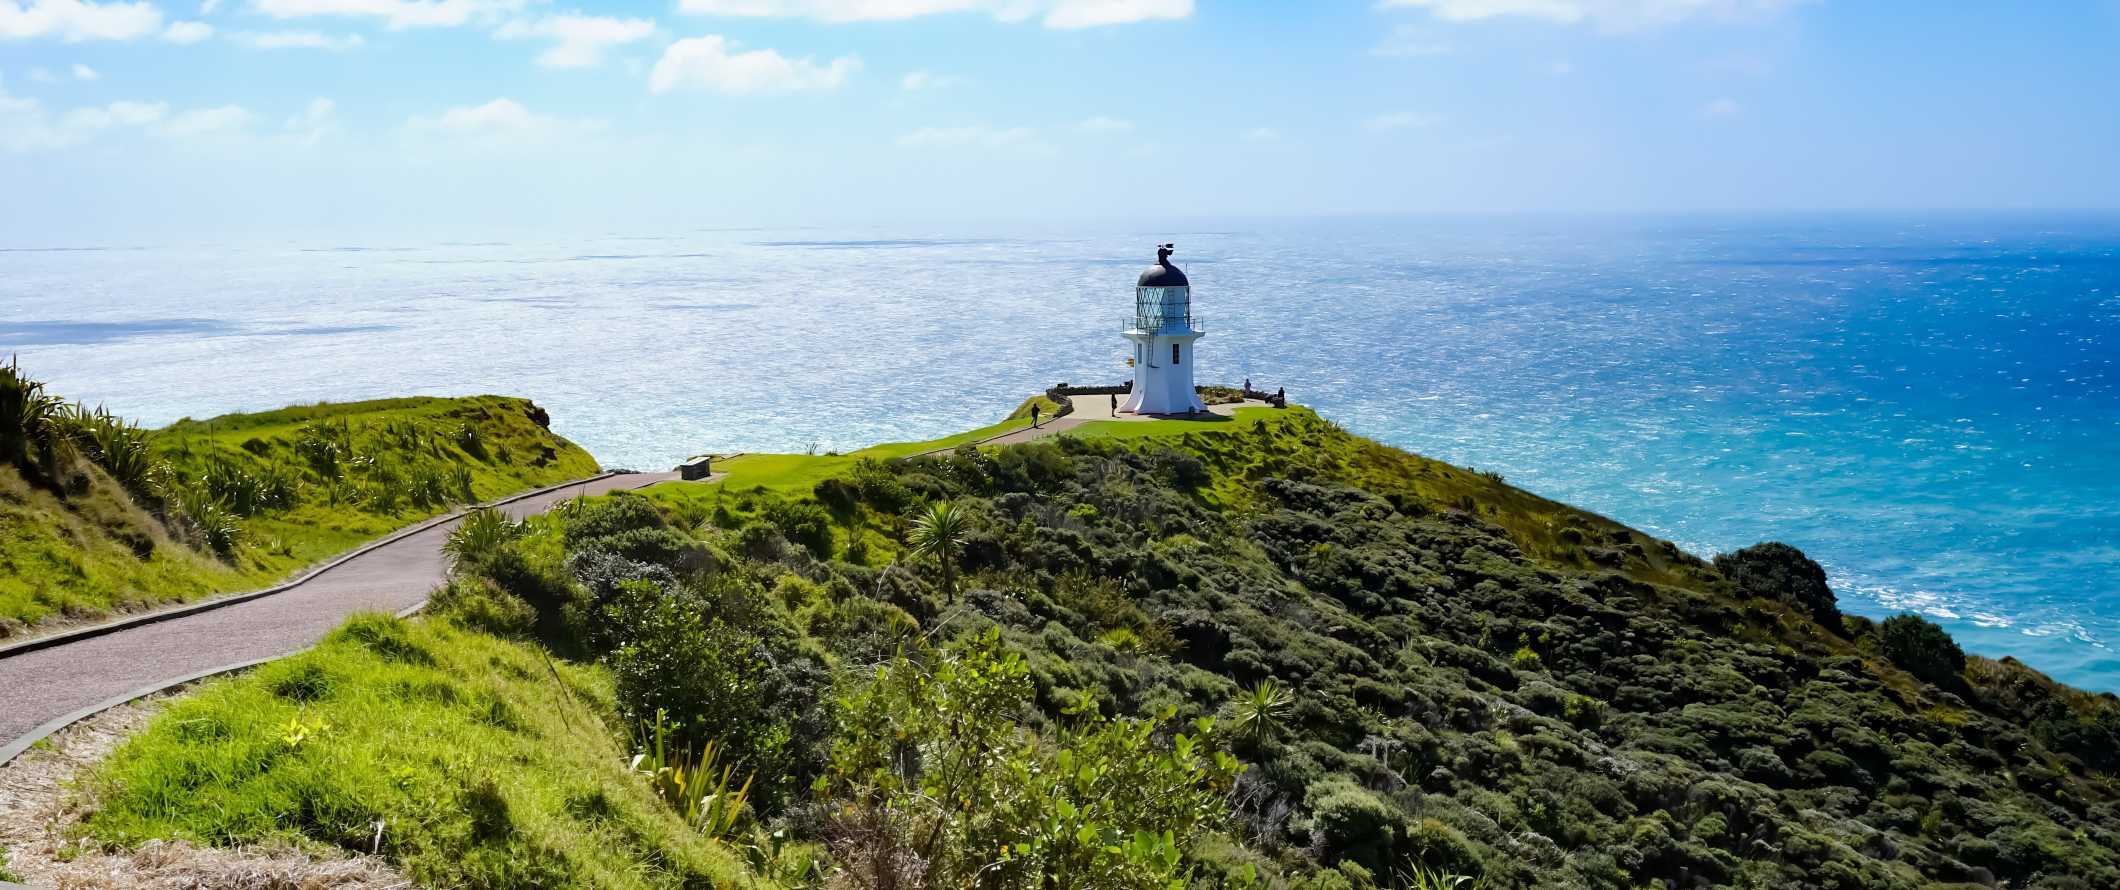 Domed white lighthouse on the edge of a lush, green cliff with the sea in the background in the Bay of Islands, New Zealand